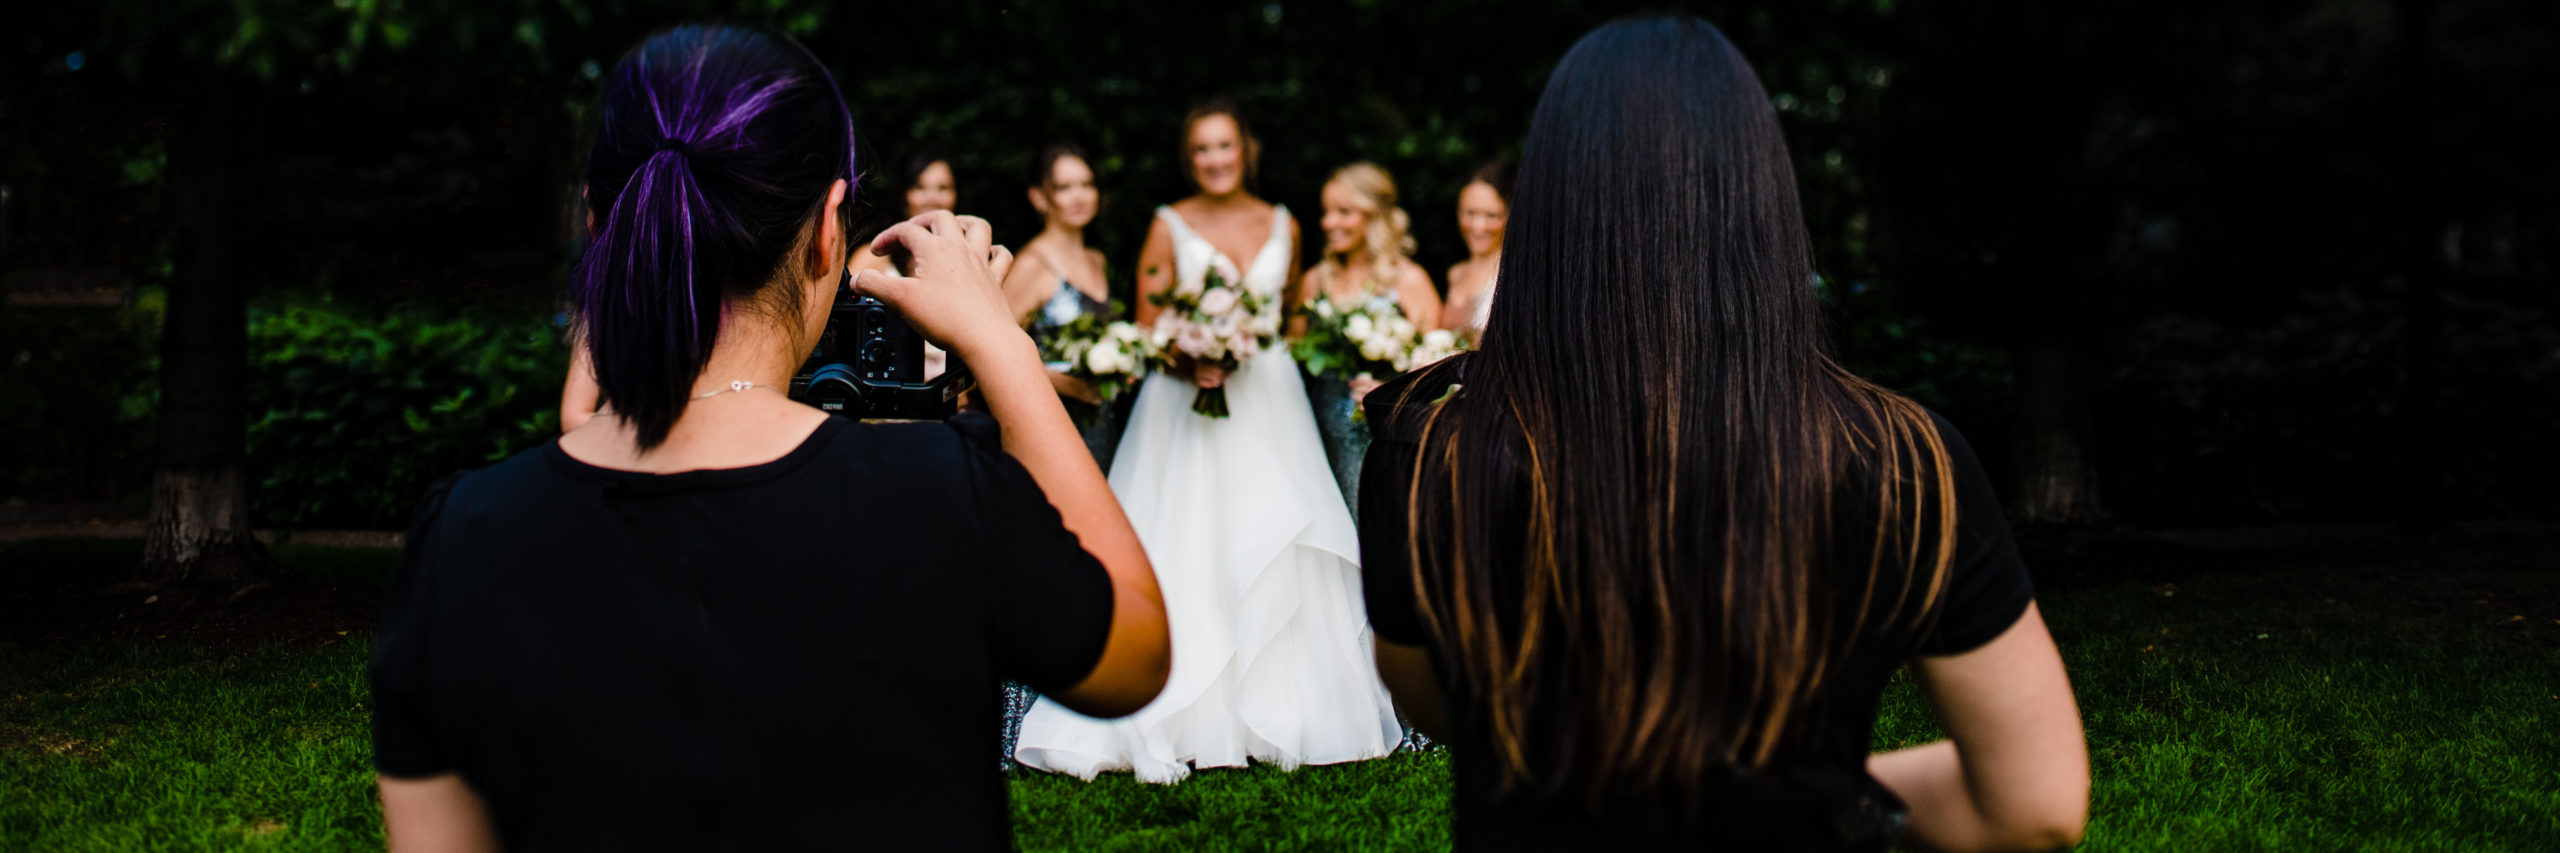 Wedding Photo and Video Packages for Boston weddings